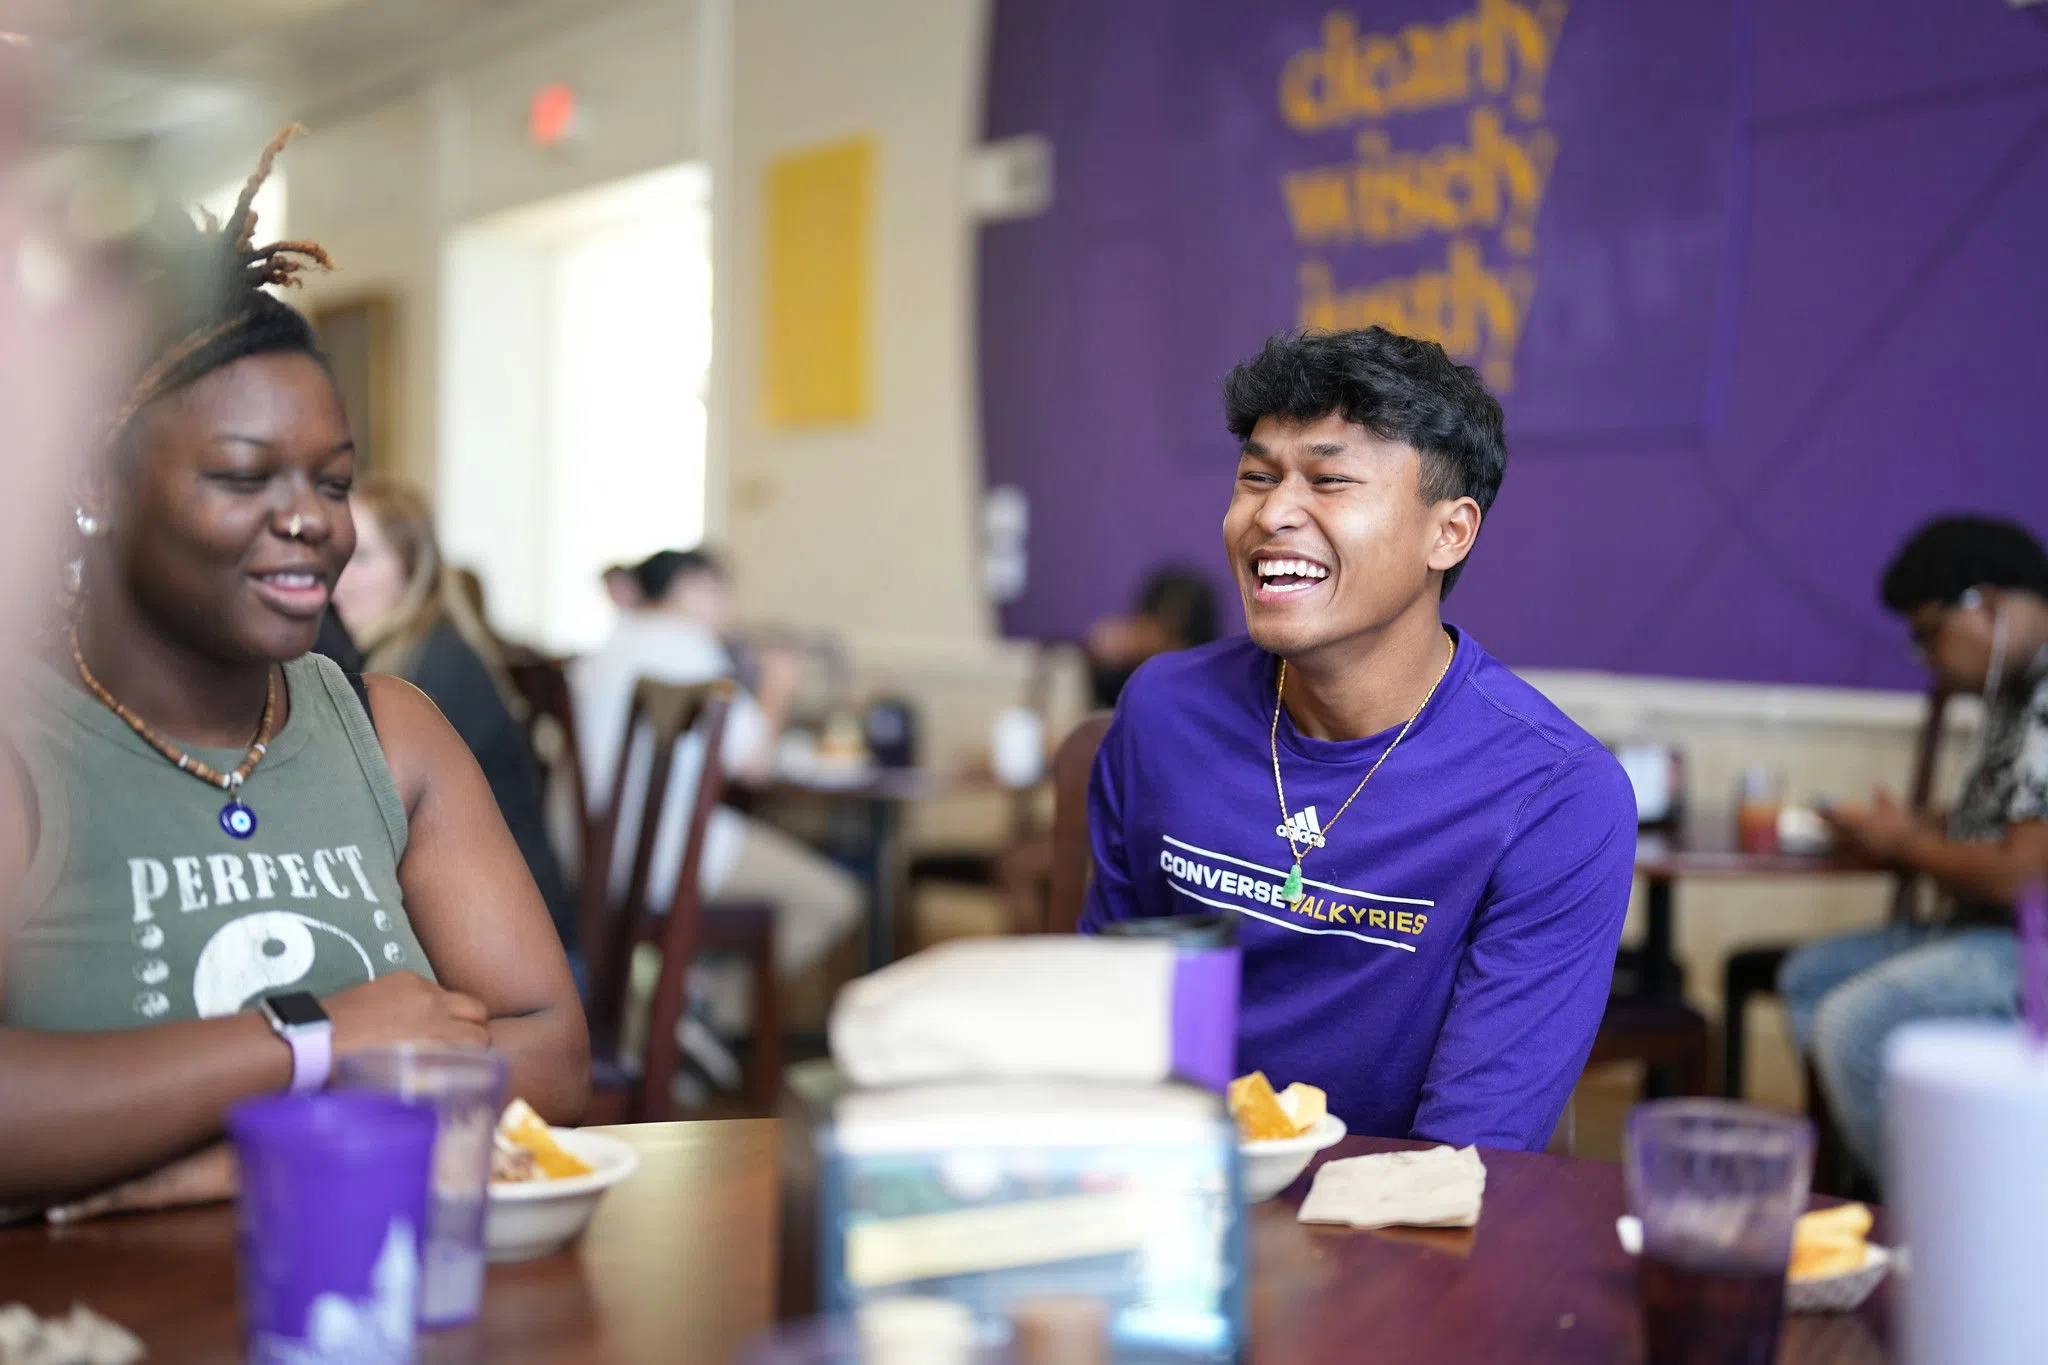 A smiling student with dark hair and a bright purple tshirt laughs with others around a table in the dining hall.